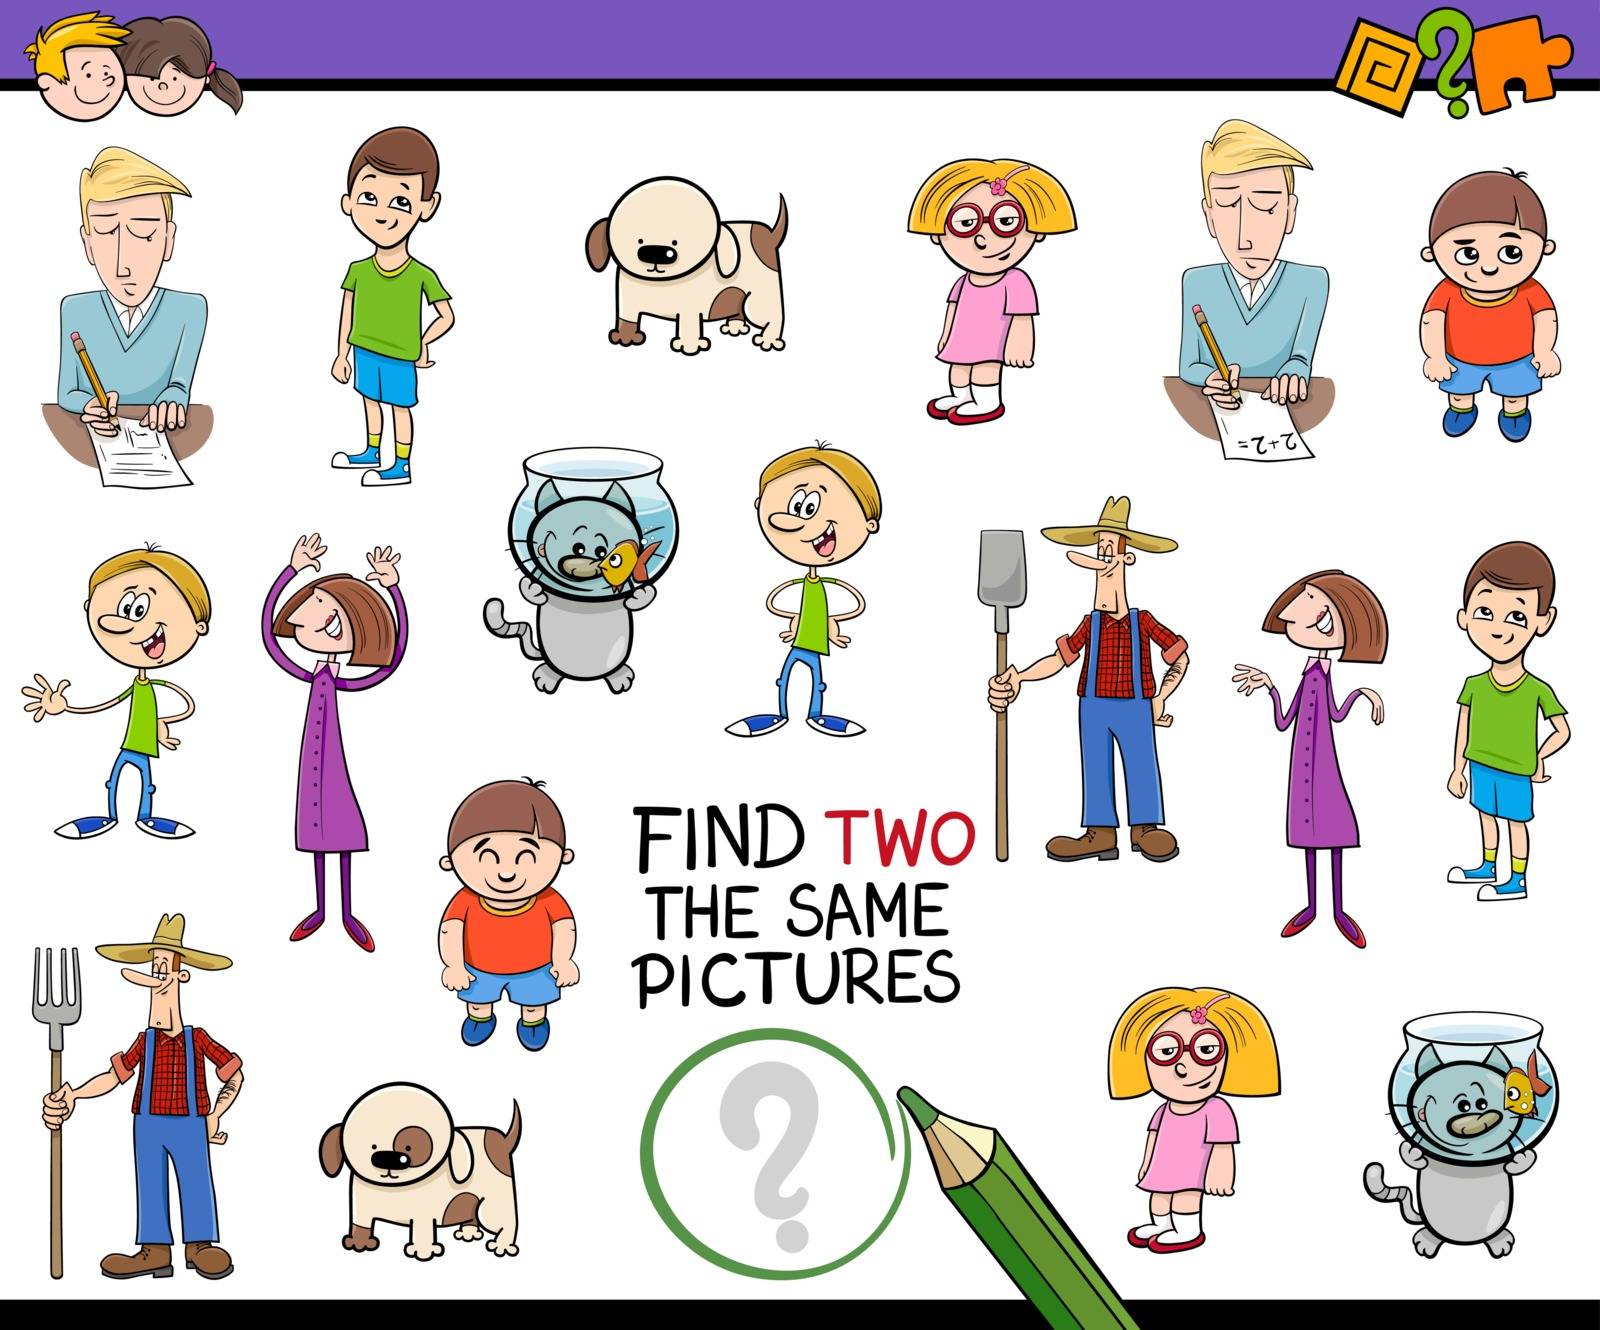 Cartoon Illustration of Find Identical Pair of Images Educational Activity for Children